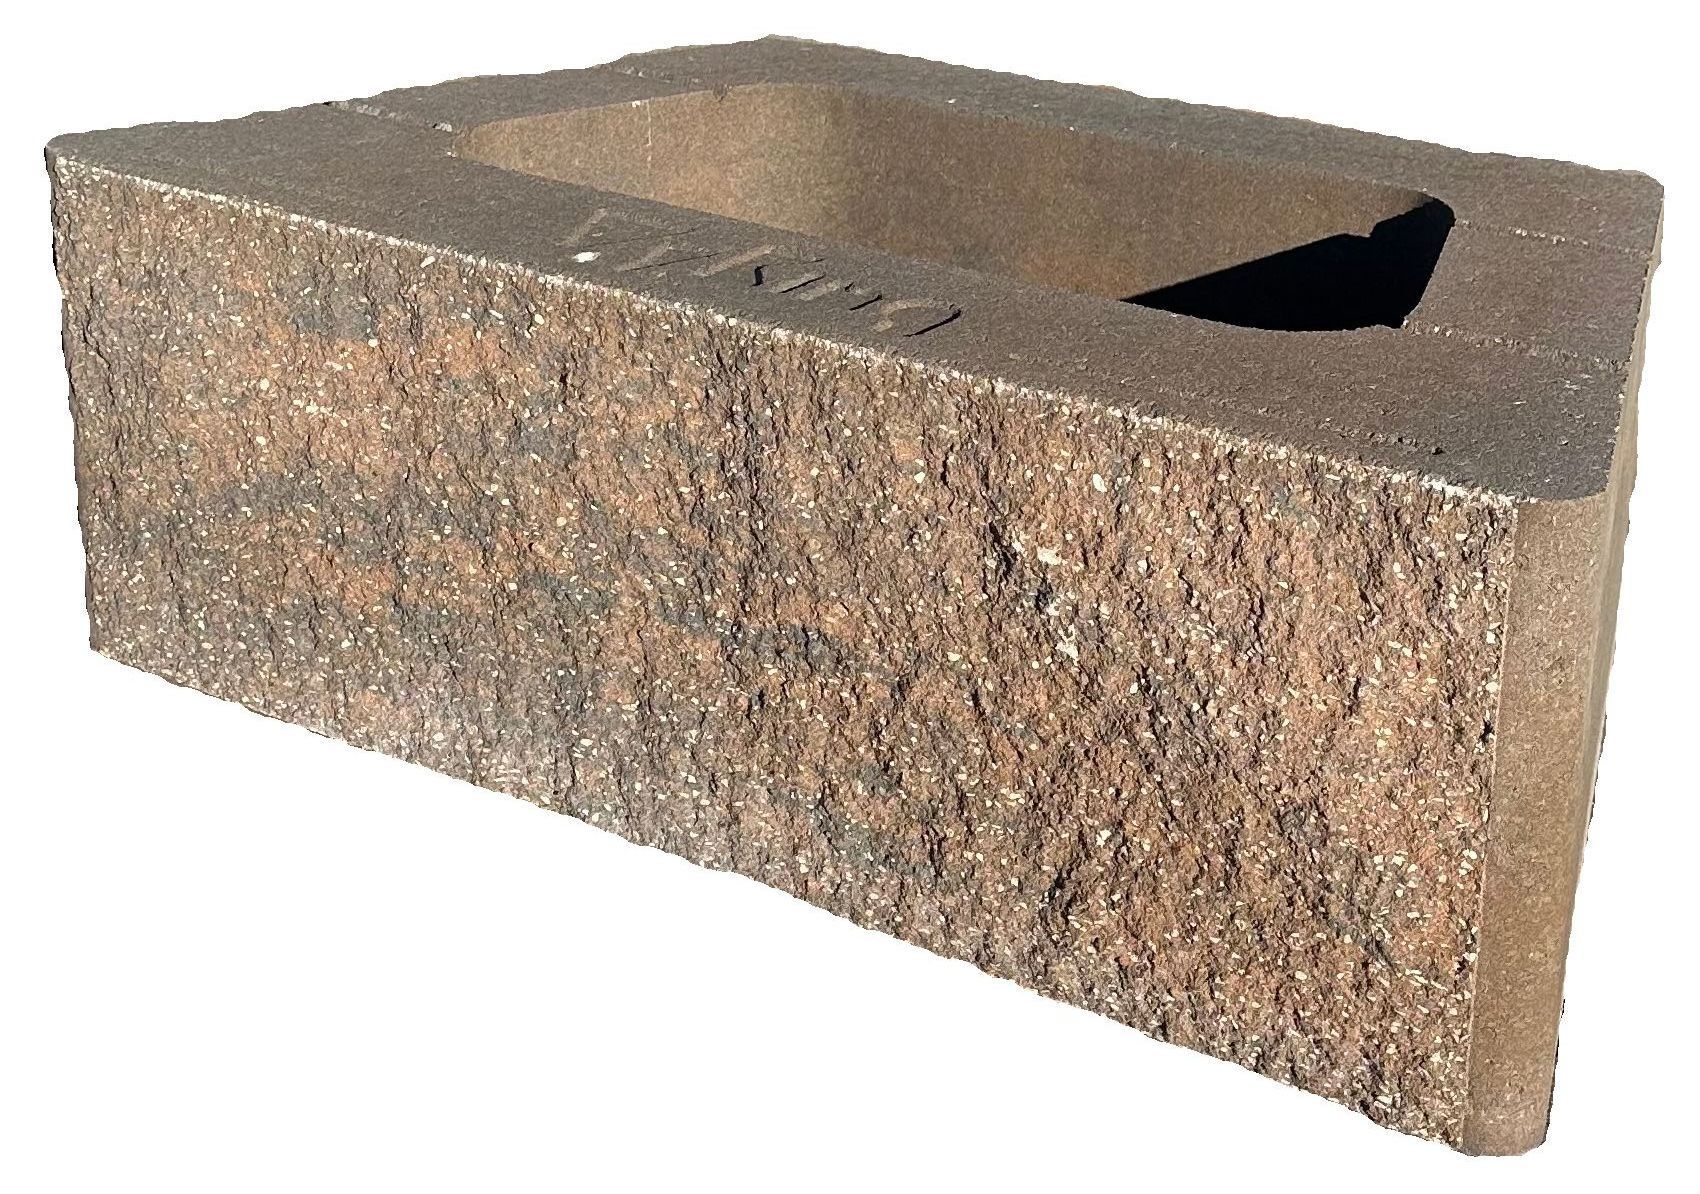 At Stockman Stoneworks, We’re Delighted to Provide Viking Retaining Wall Block.